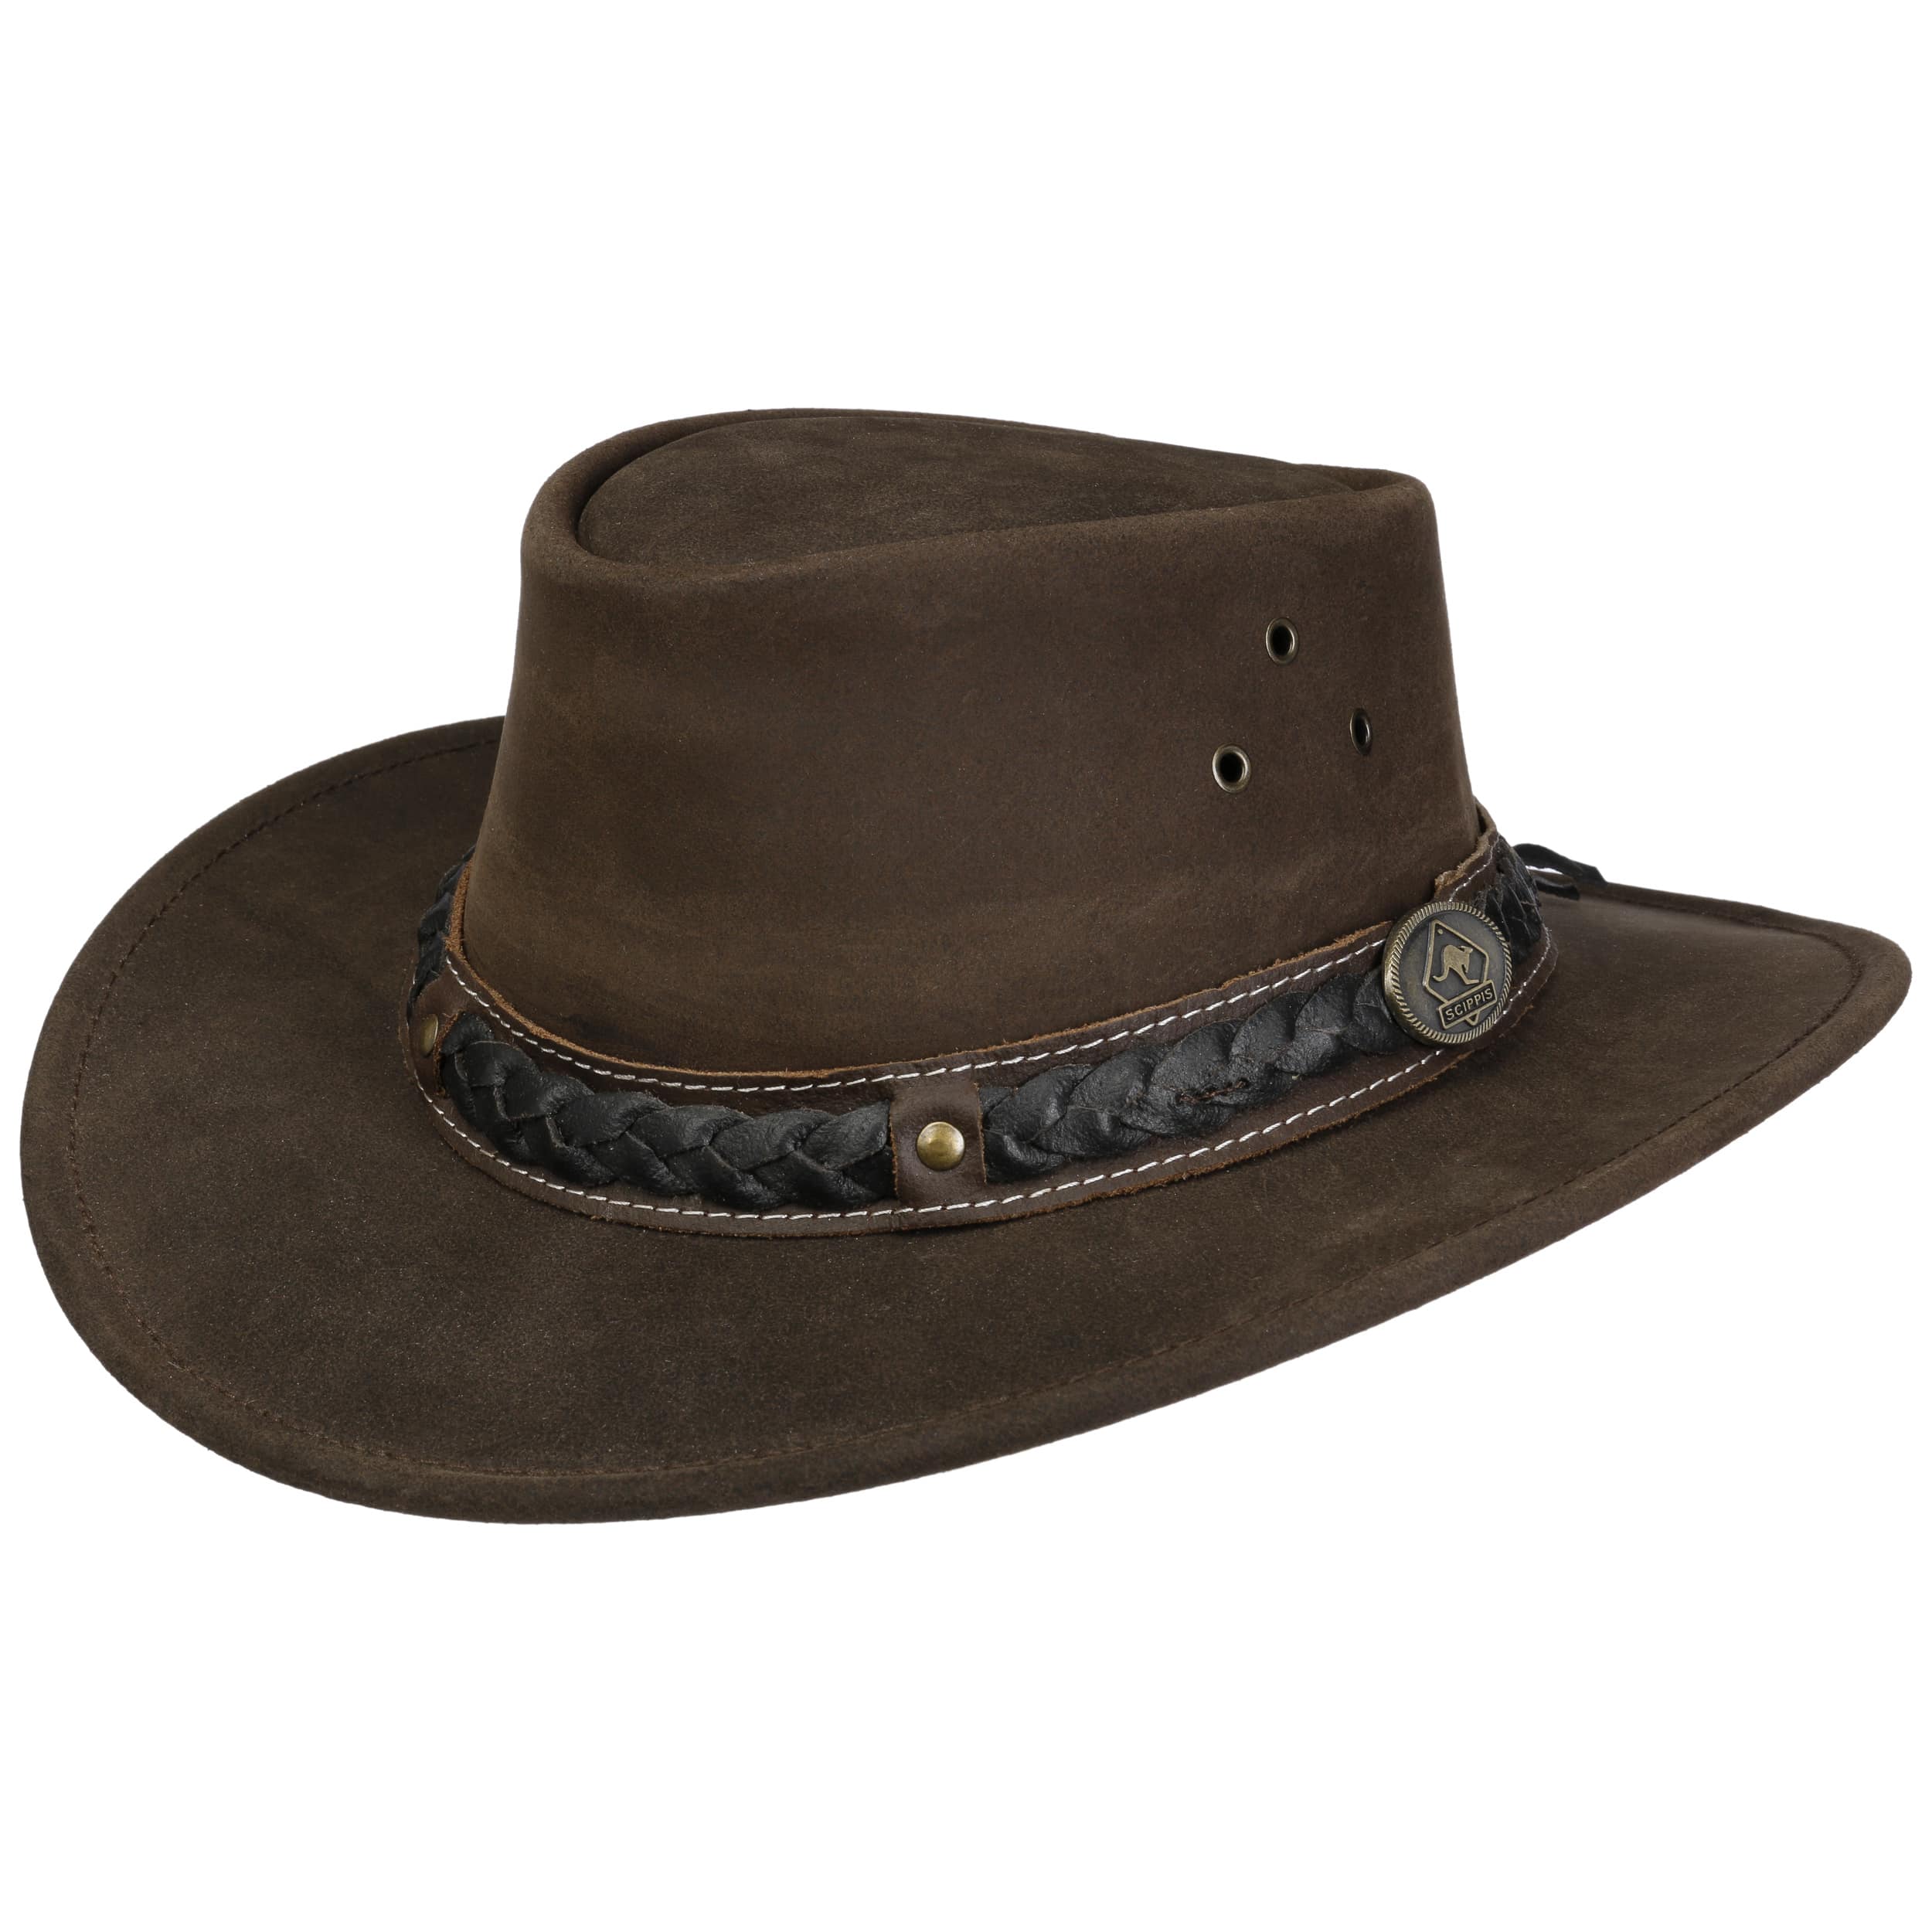 Wilsons Leather Hat by Scippis - 83,95 €